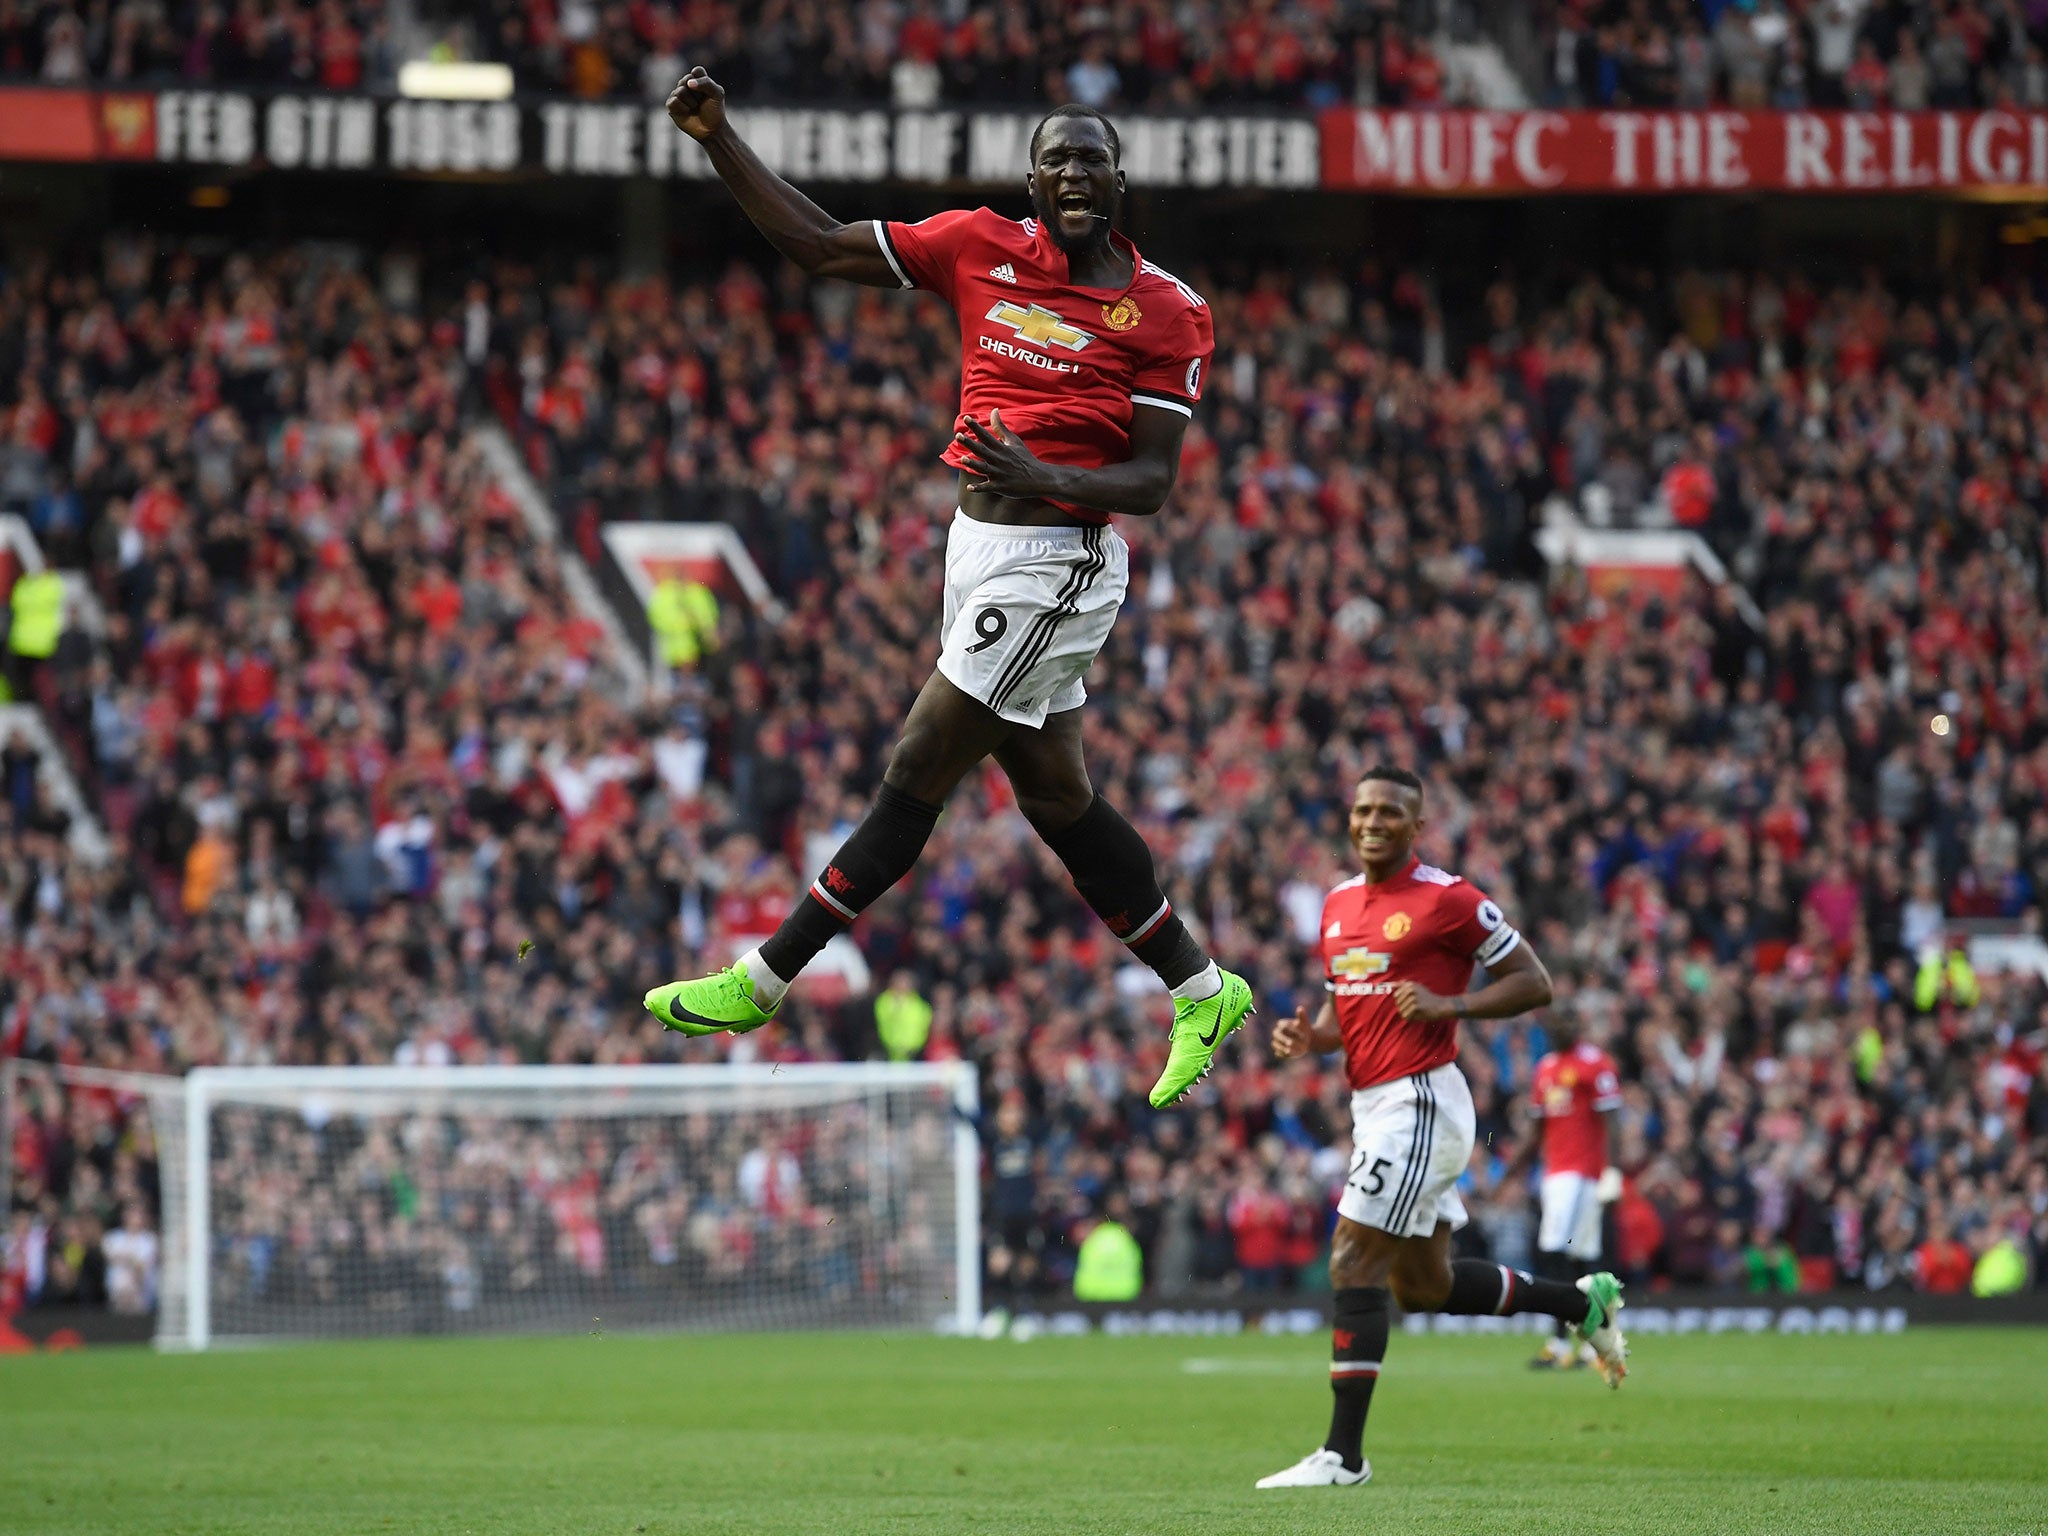 Romelu Lukaku scored United's third with a well-taken finish from close quarters